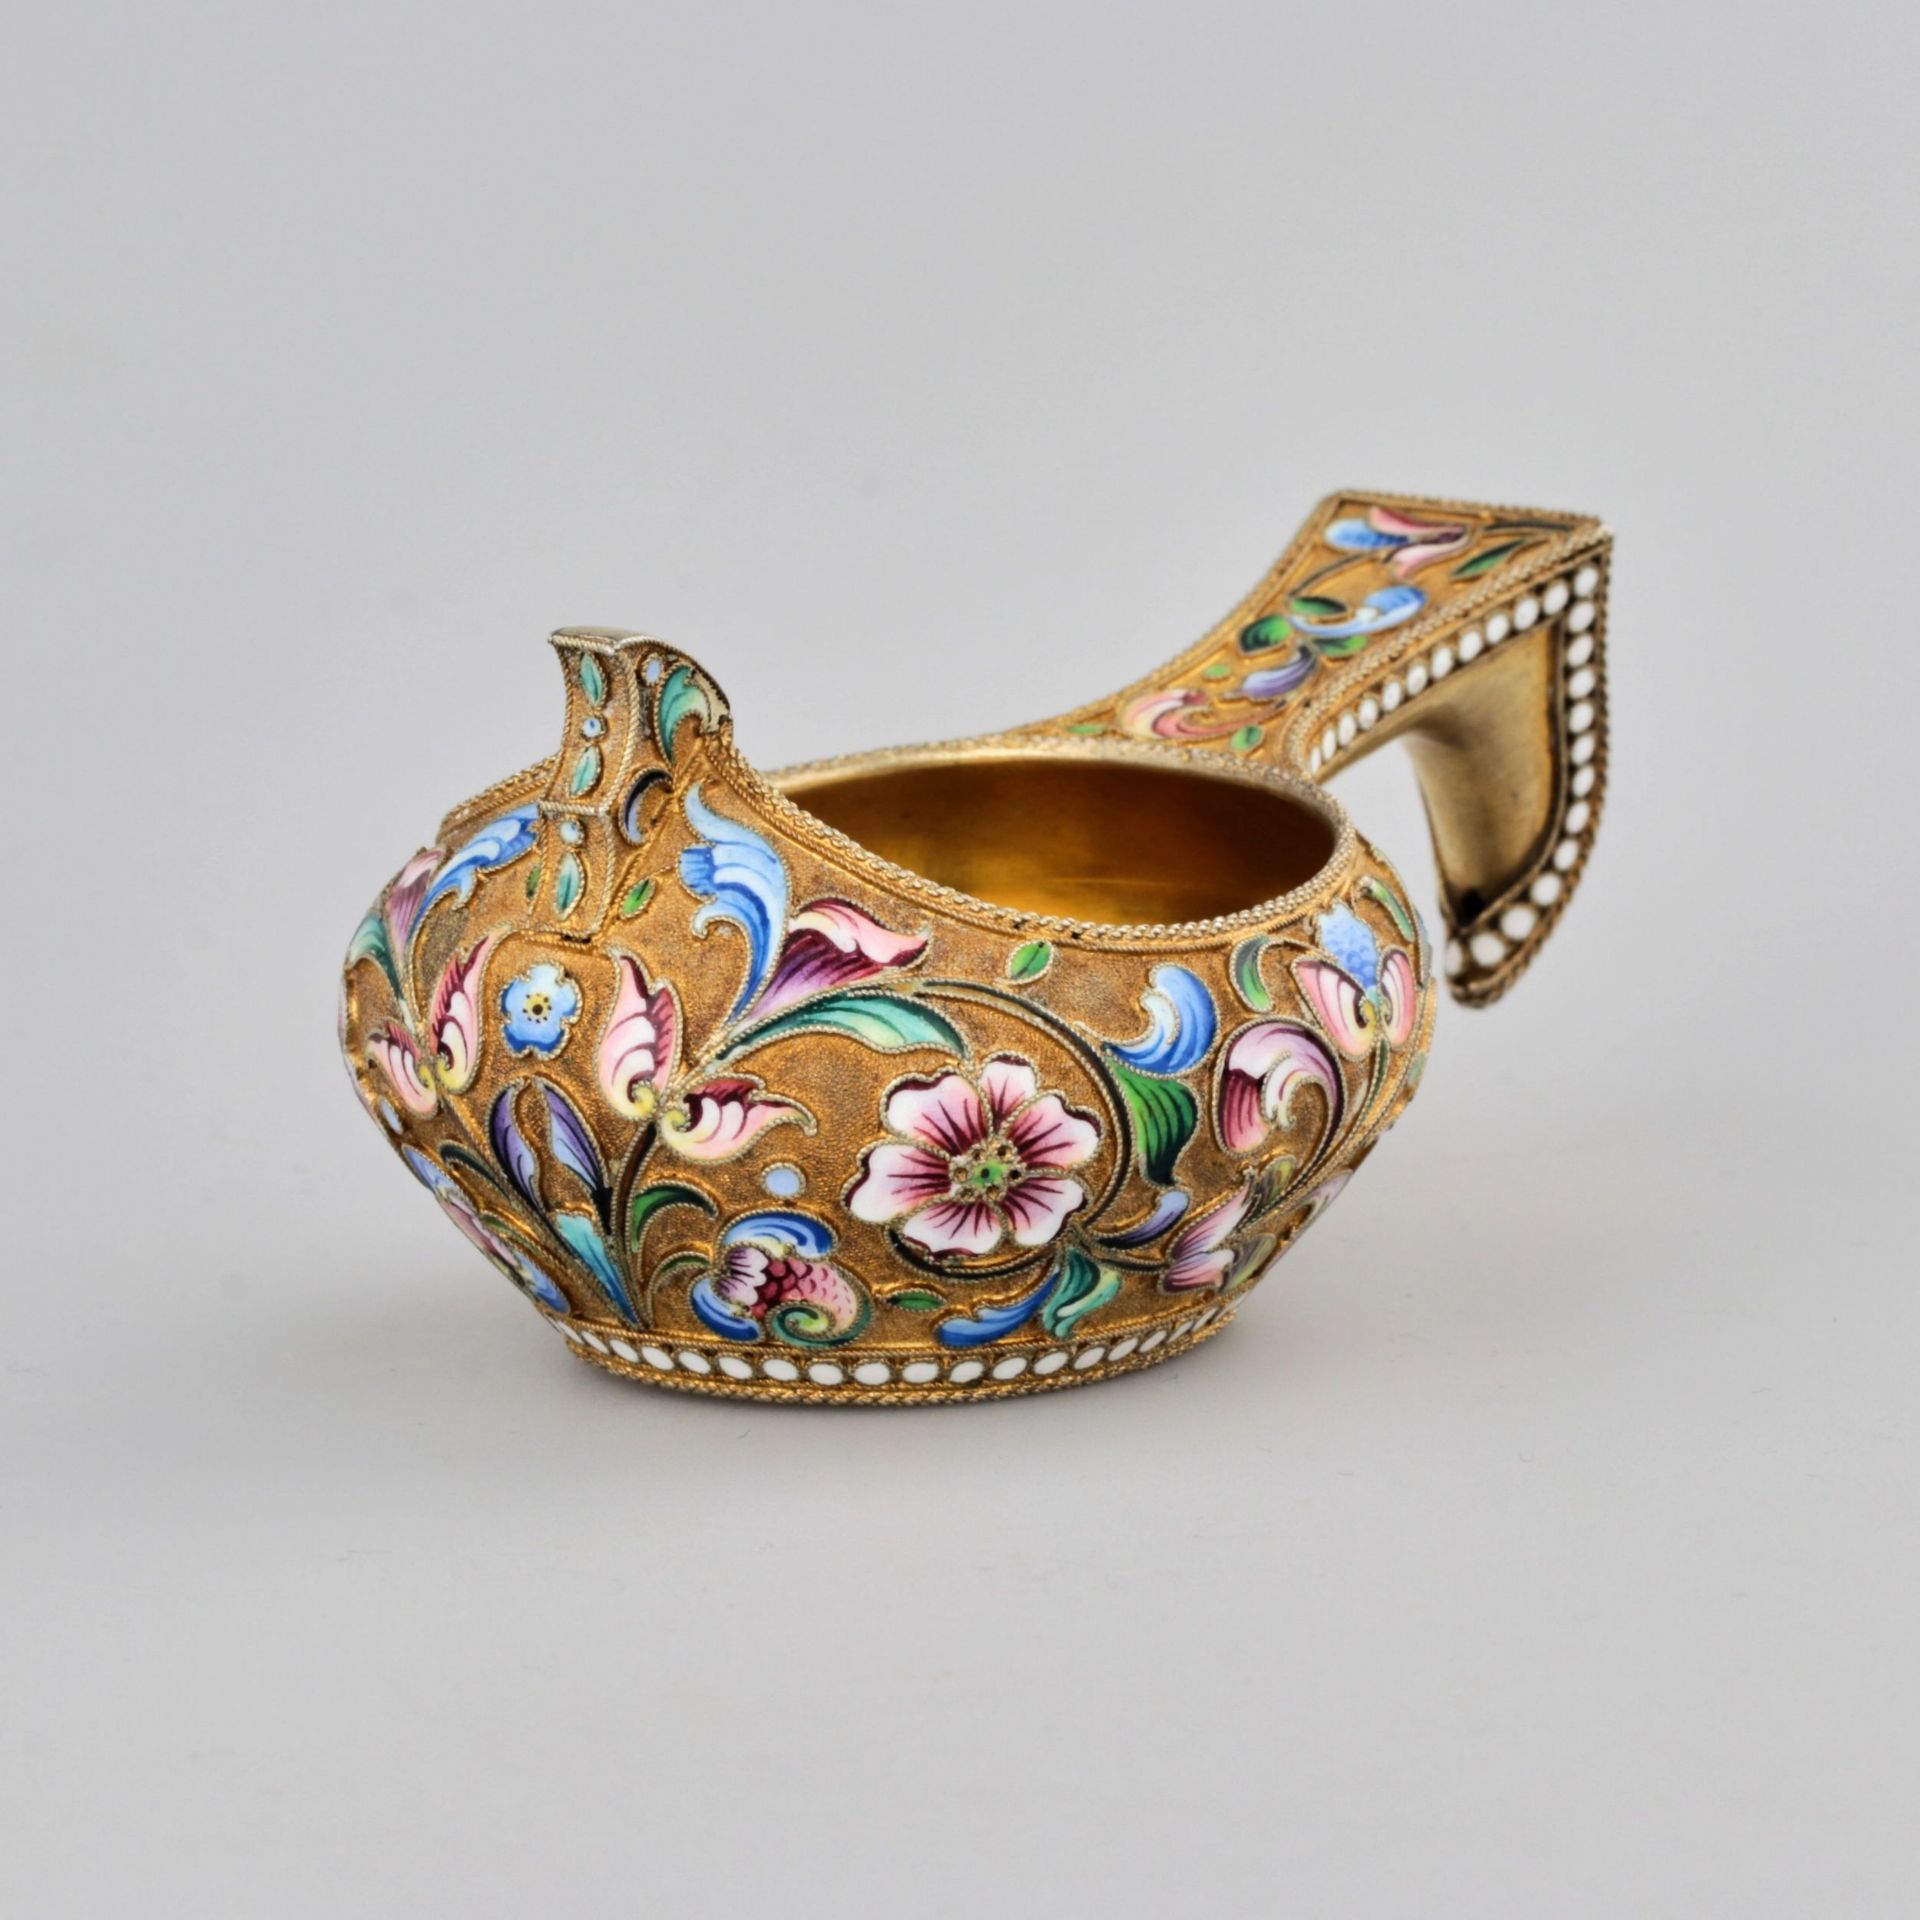 Decorative kovsh in Russian style with enamel. - Image 2 of 6